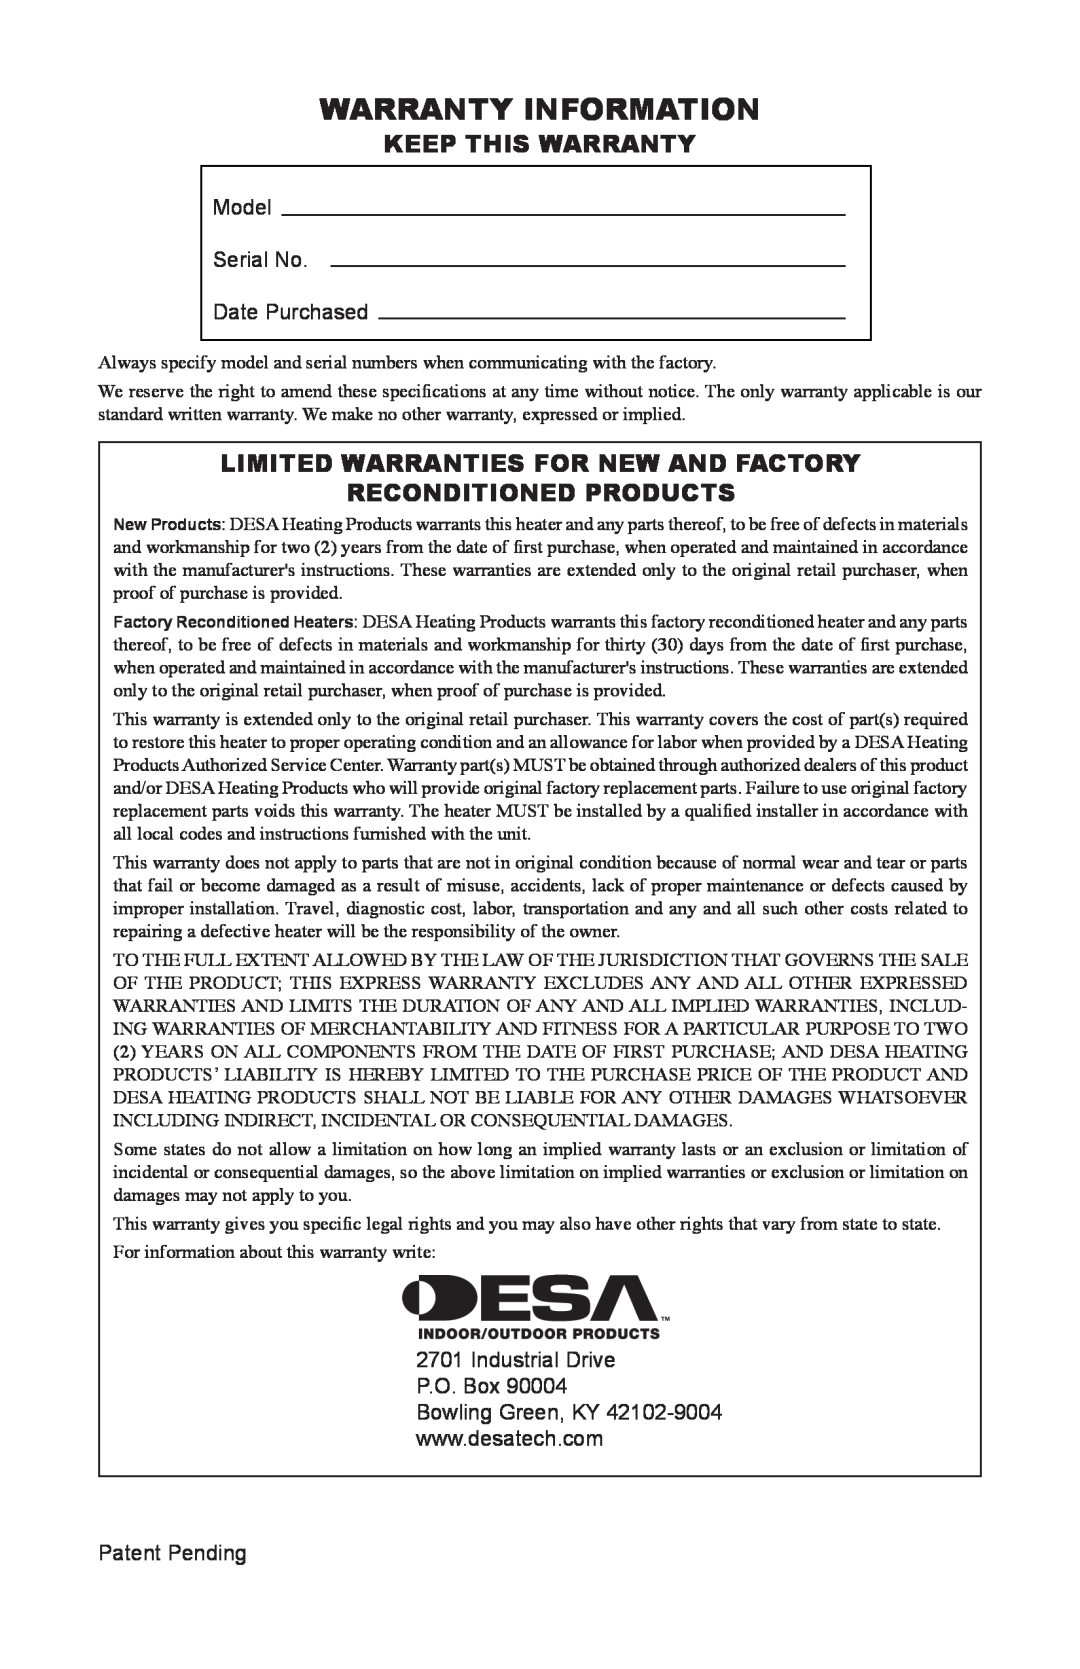 Desa LSFG20NT Warranty Information, Keep This Warranty, Limited Warranties For New And Factory, Reconditioned Products 